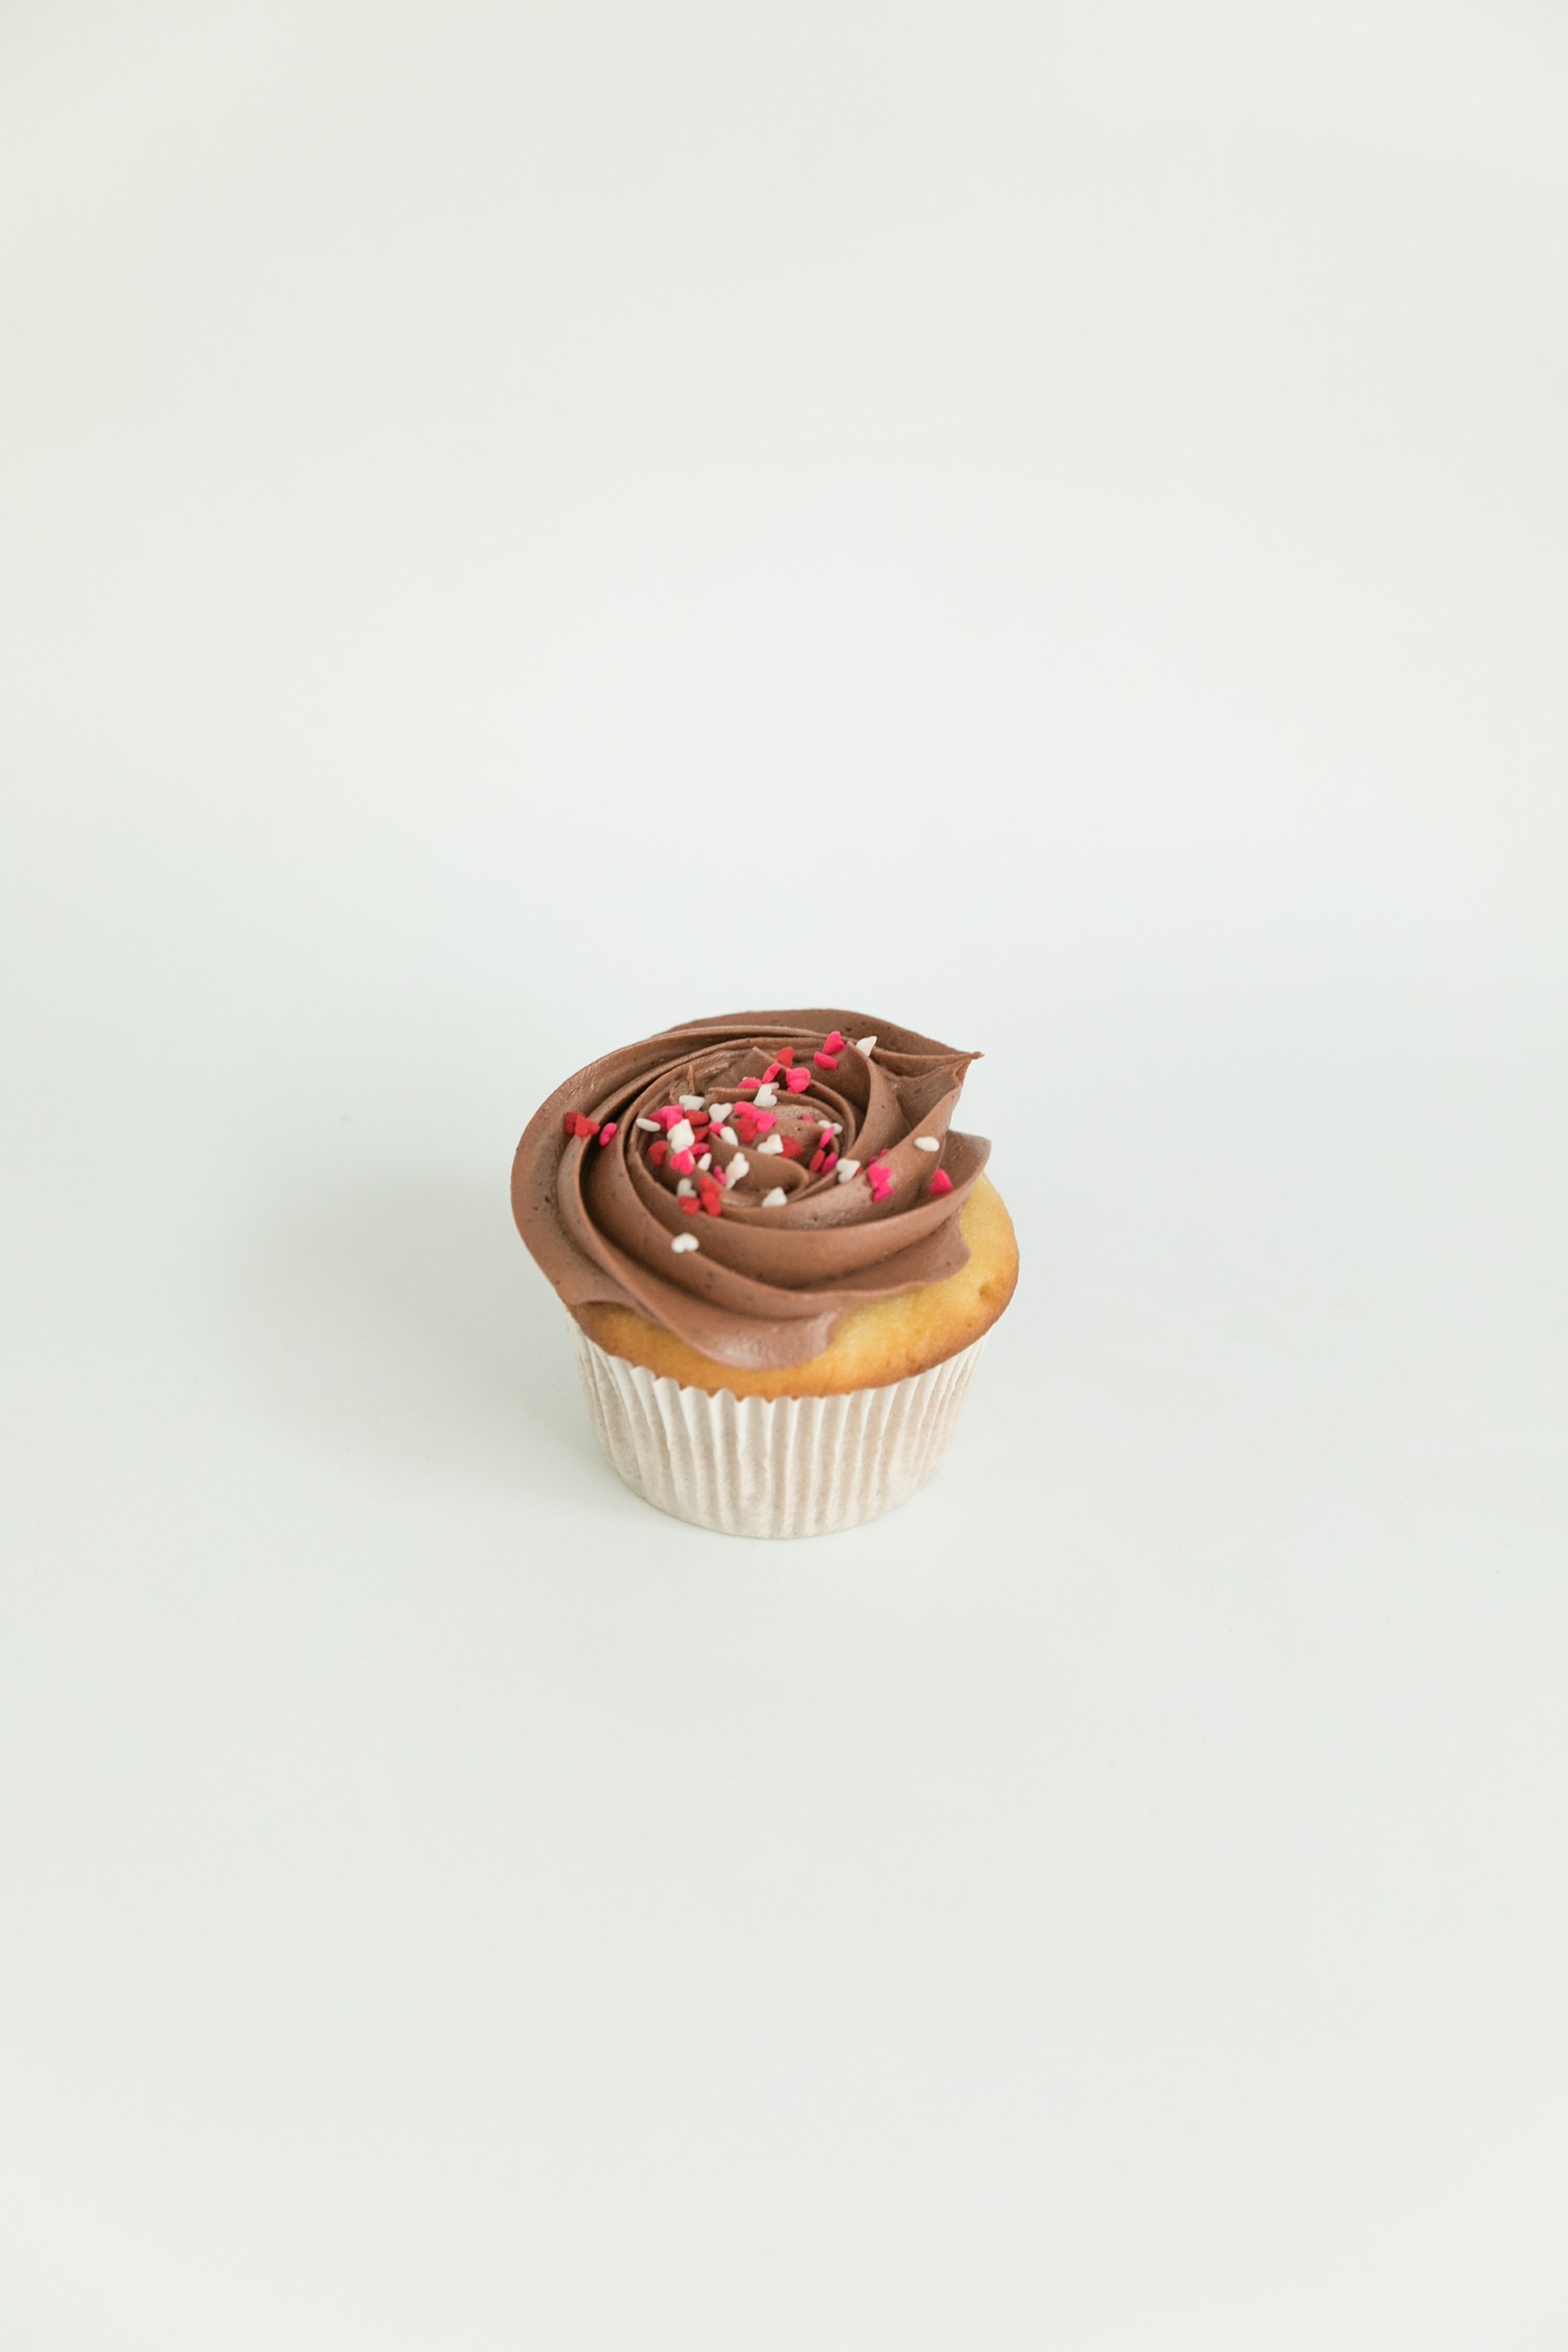  Vanilla cupcake with chocolate buttercream and heart sprinkles  